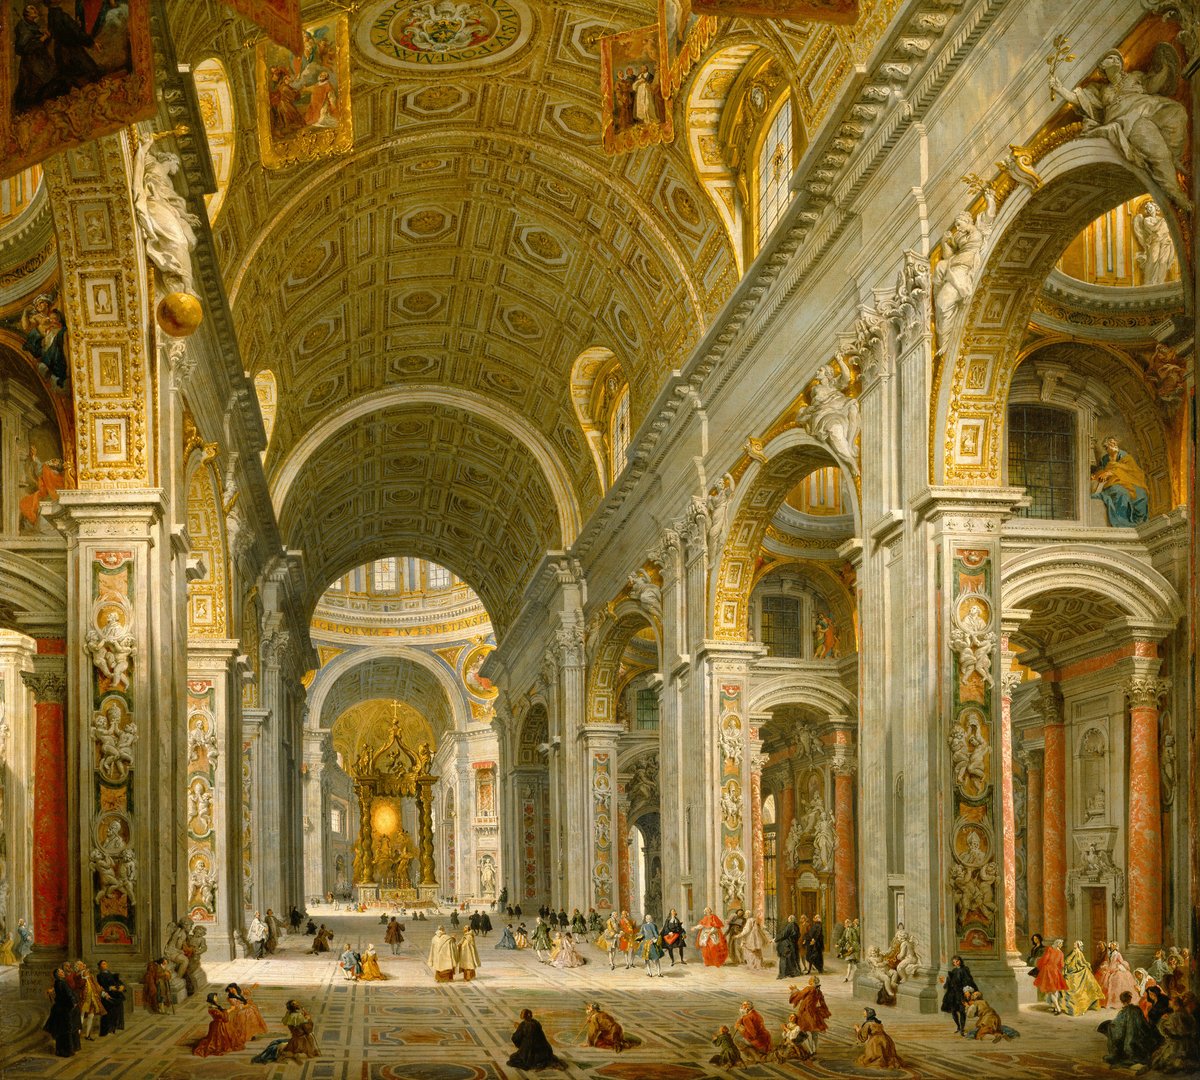 The Nave of St. Peter's Basilica by Giovanni Paolo Panini (1735)